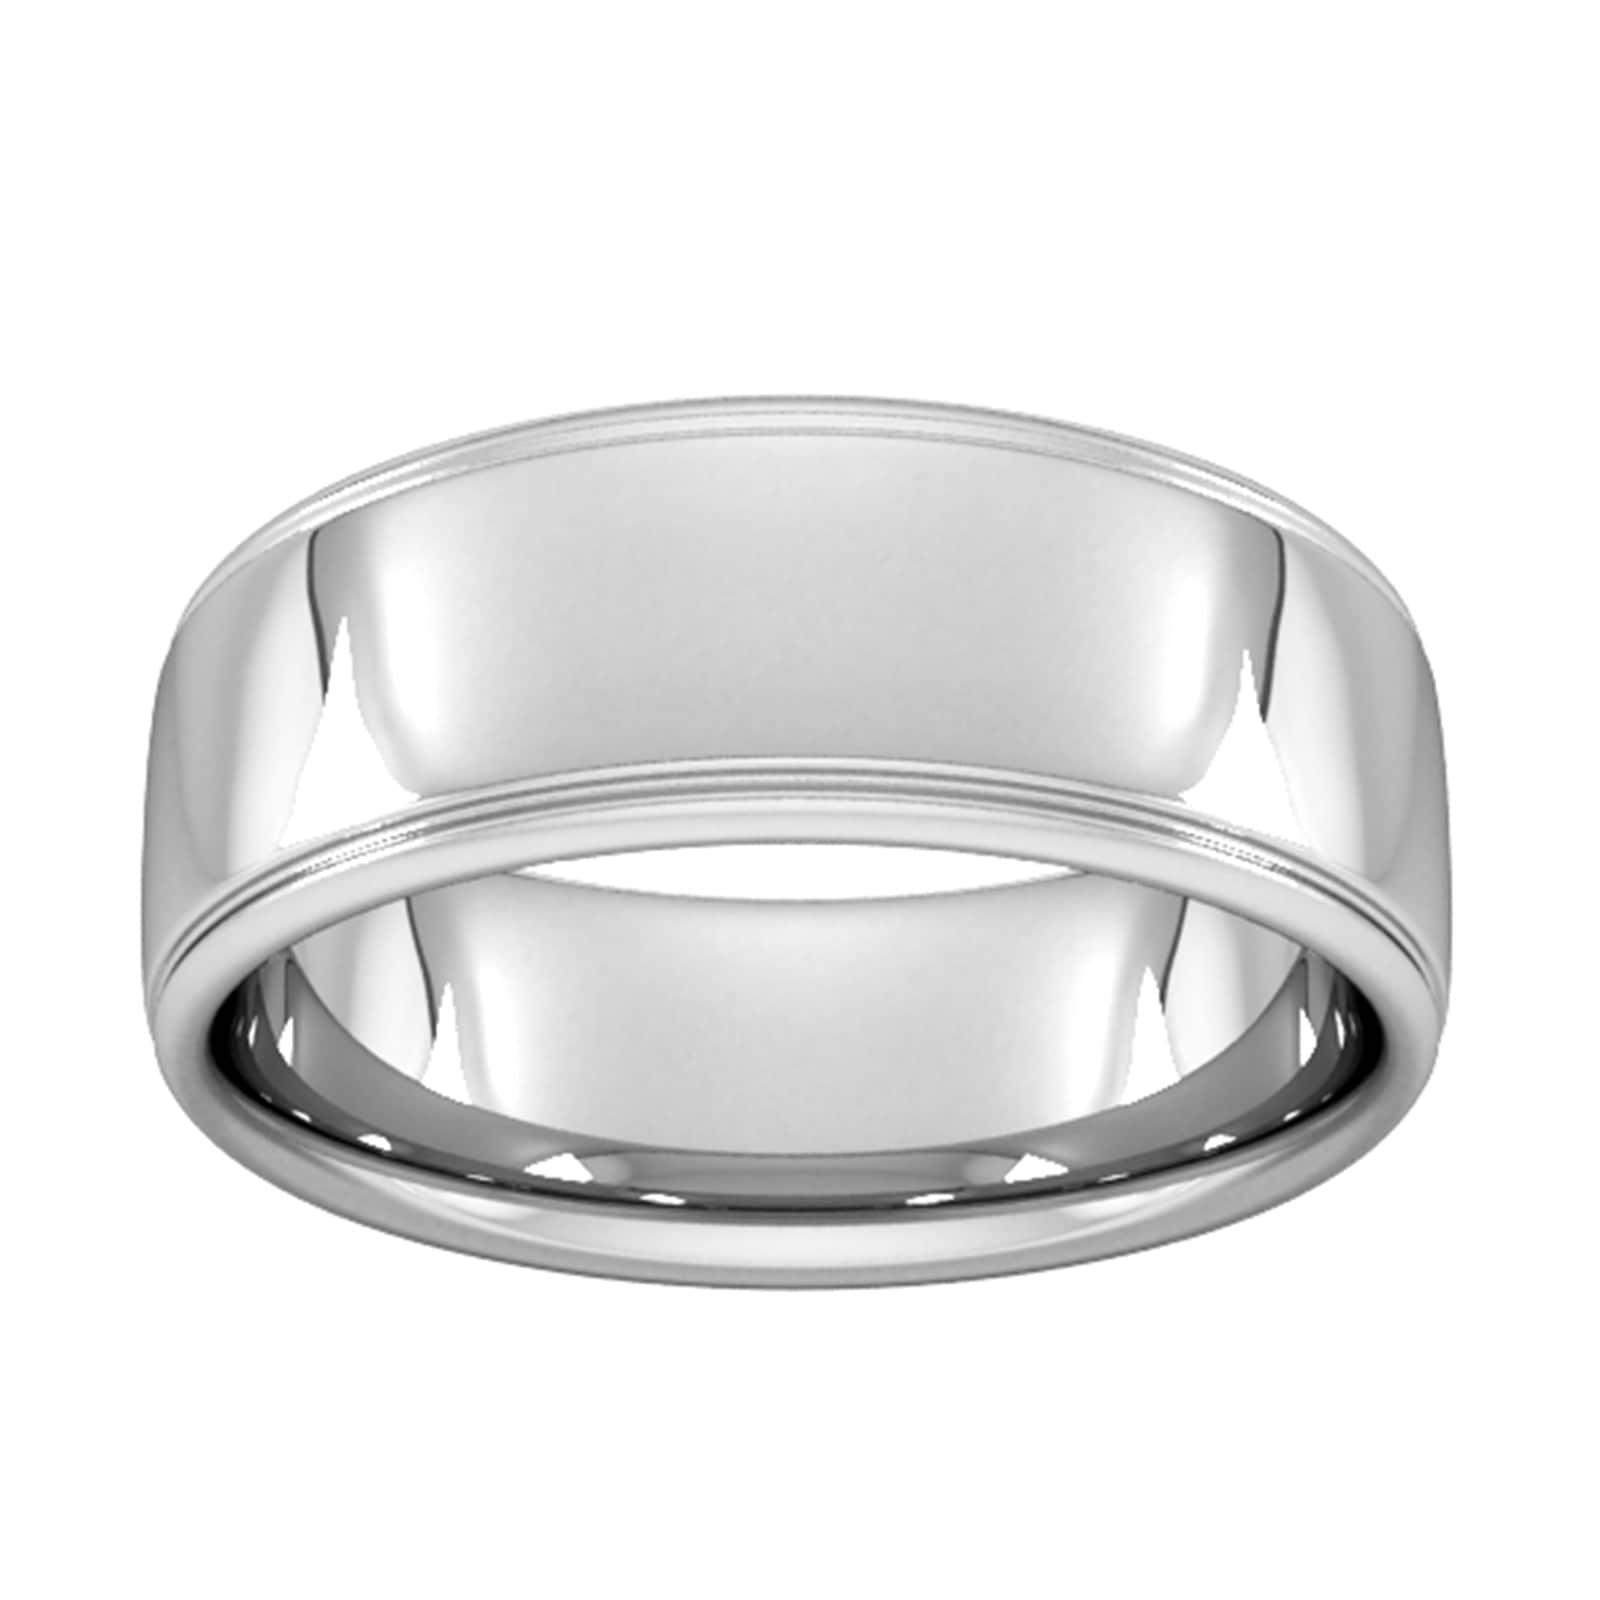 8mm Slight Court Standard Polished Finish With Grooves Wedding Ring In 9 Carat White Gold - Ring Size X